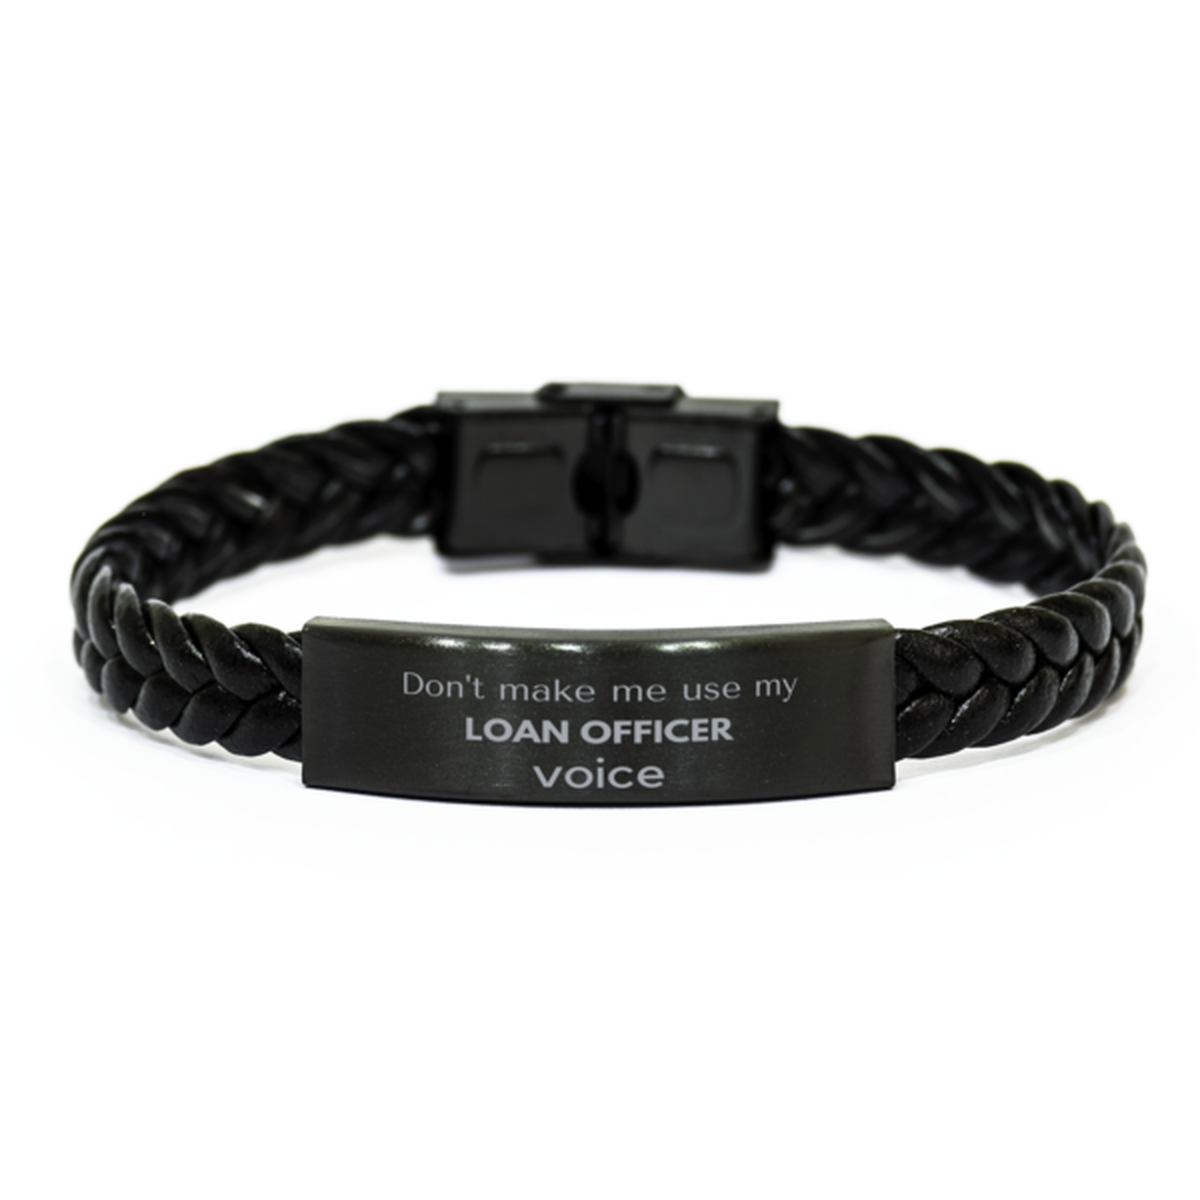 Don't make me use my Loan Officer voice, Sarcasm Loan Officer Gifts, Christmas Loan Officer Braided Leather Bracelet Birthday Unique Gifts For Loan Officer Coworkers, Men, Women, Colleague, Friends